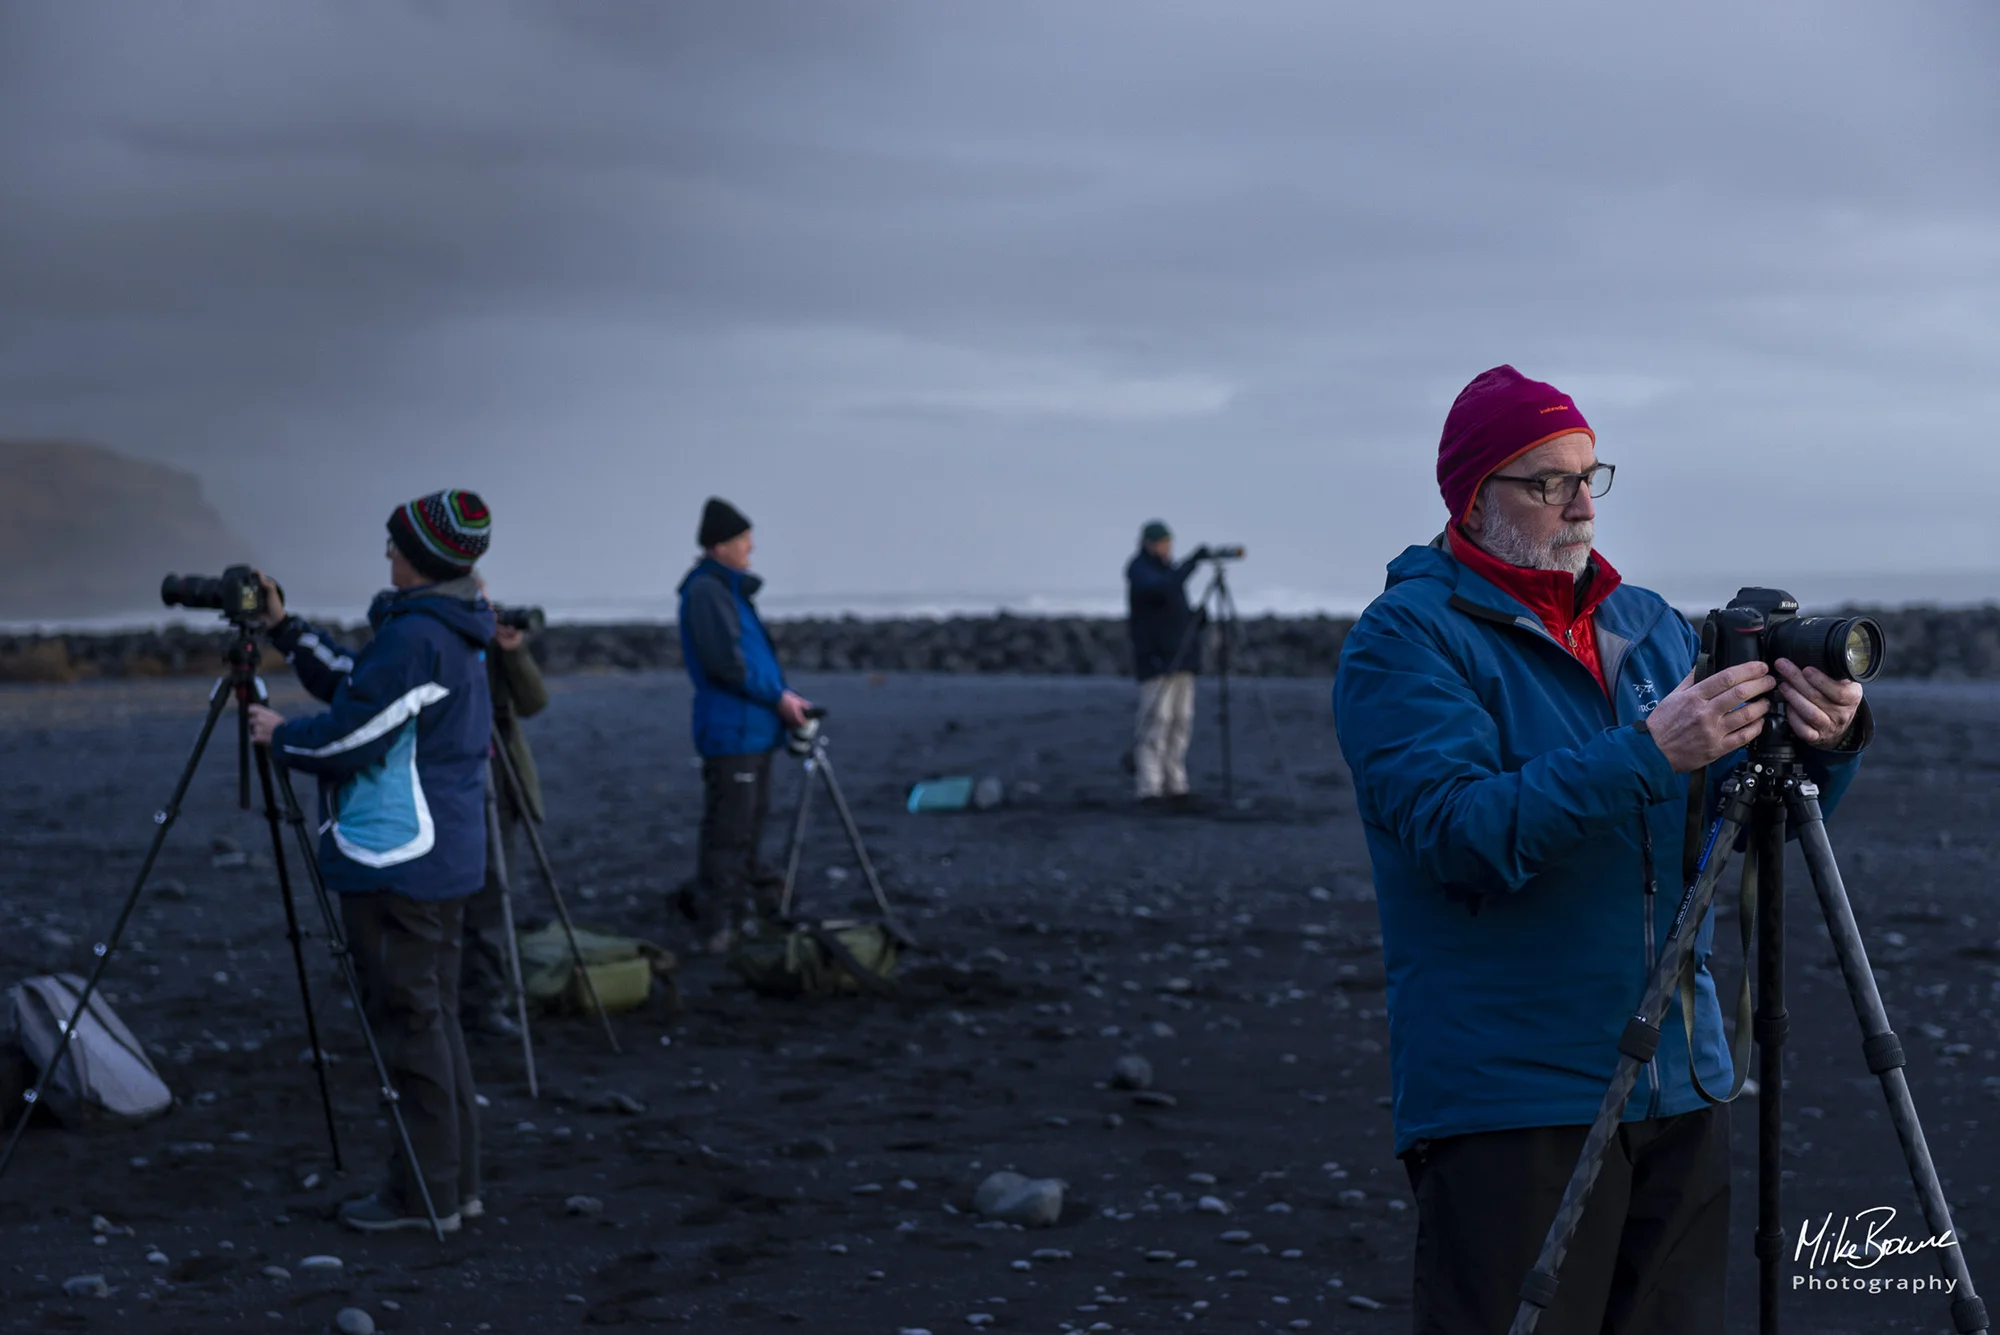 Four photographers prepare cameras at twilight in Iceland